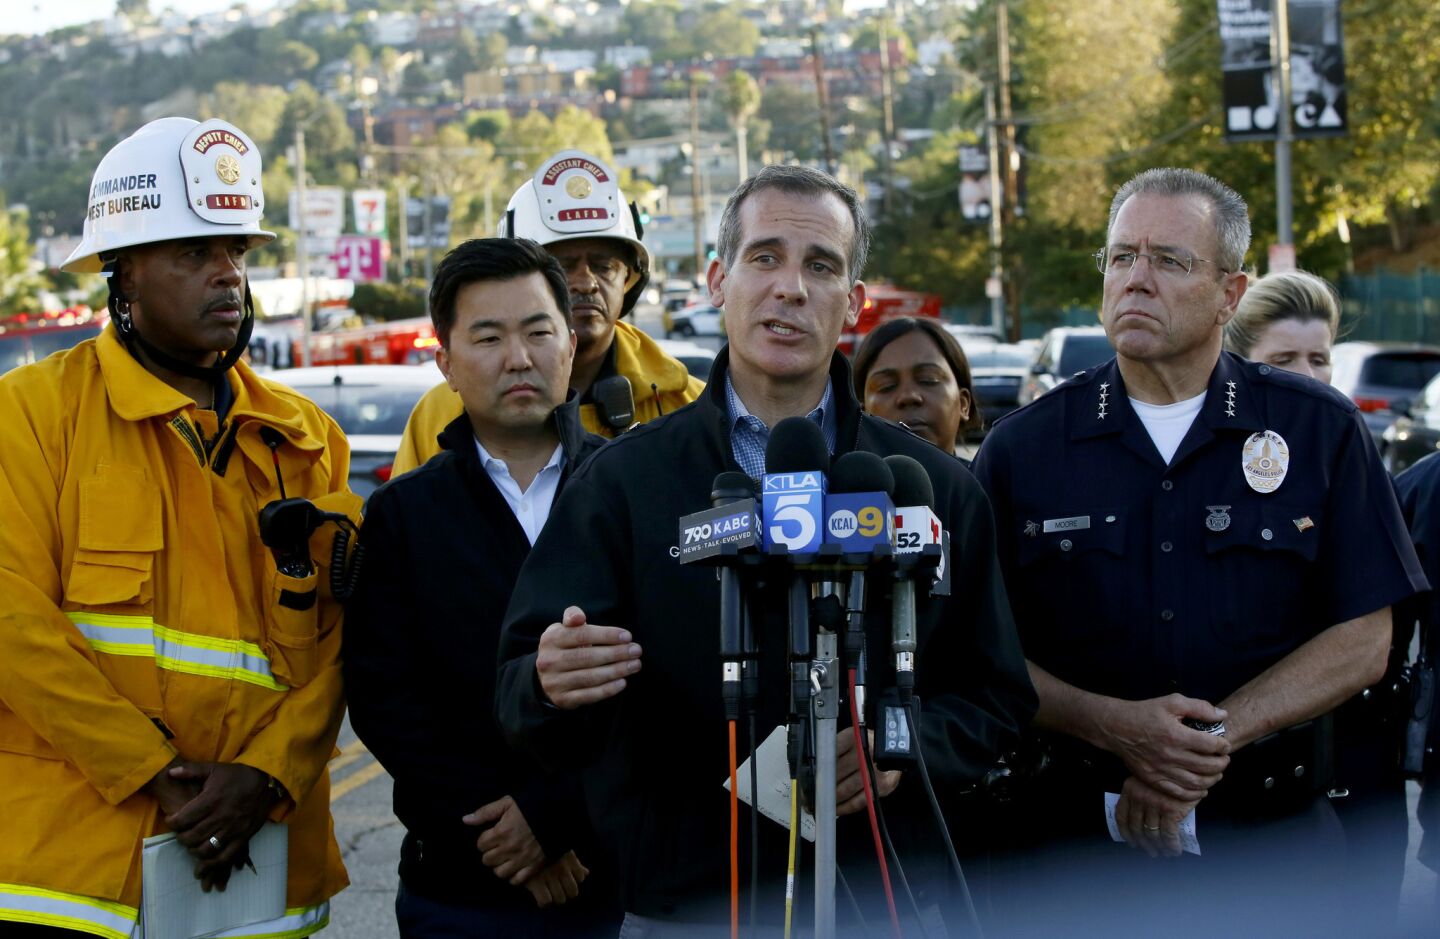 Los Angeles Mayor Eric Garcetti, center, and Police Chief Michel Moore, right, brief the media at a news conference after a gunman held dozens of people hostage inside a Trader Joe's market before surrendering to police in Los Angeles.